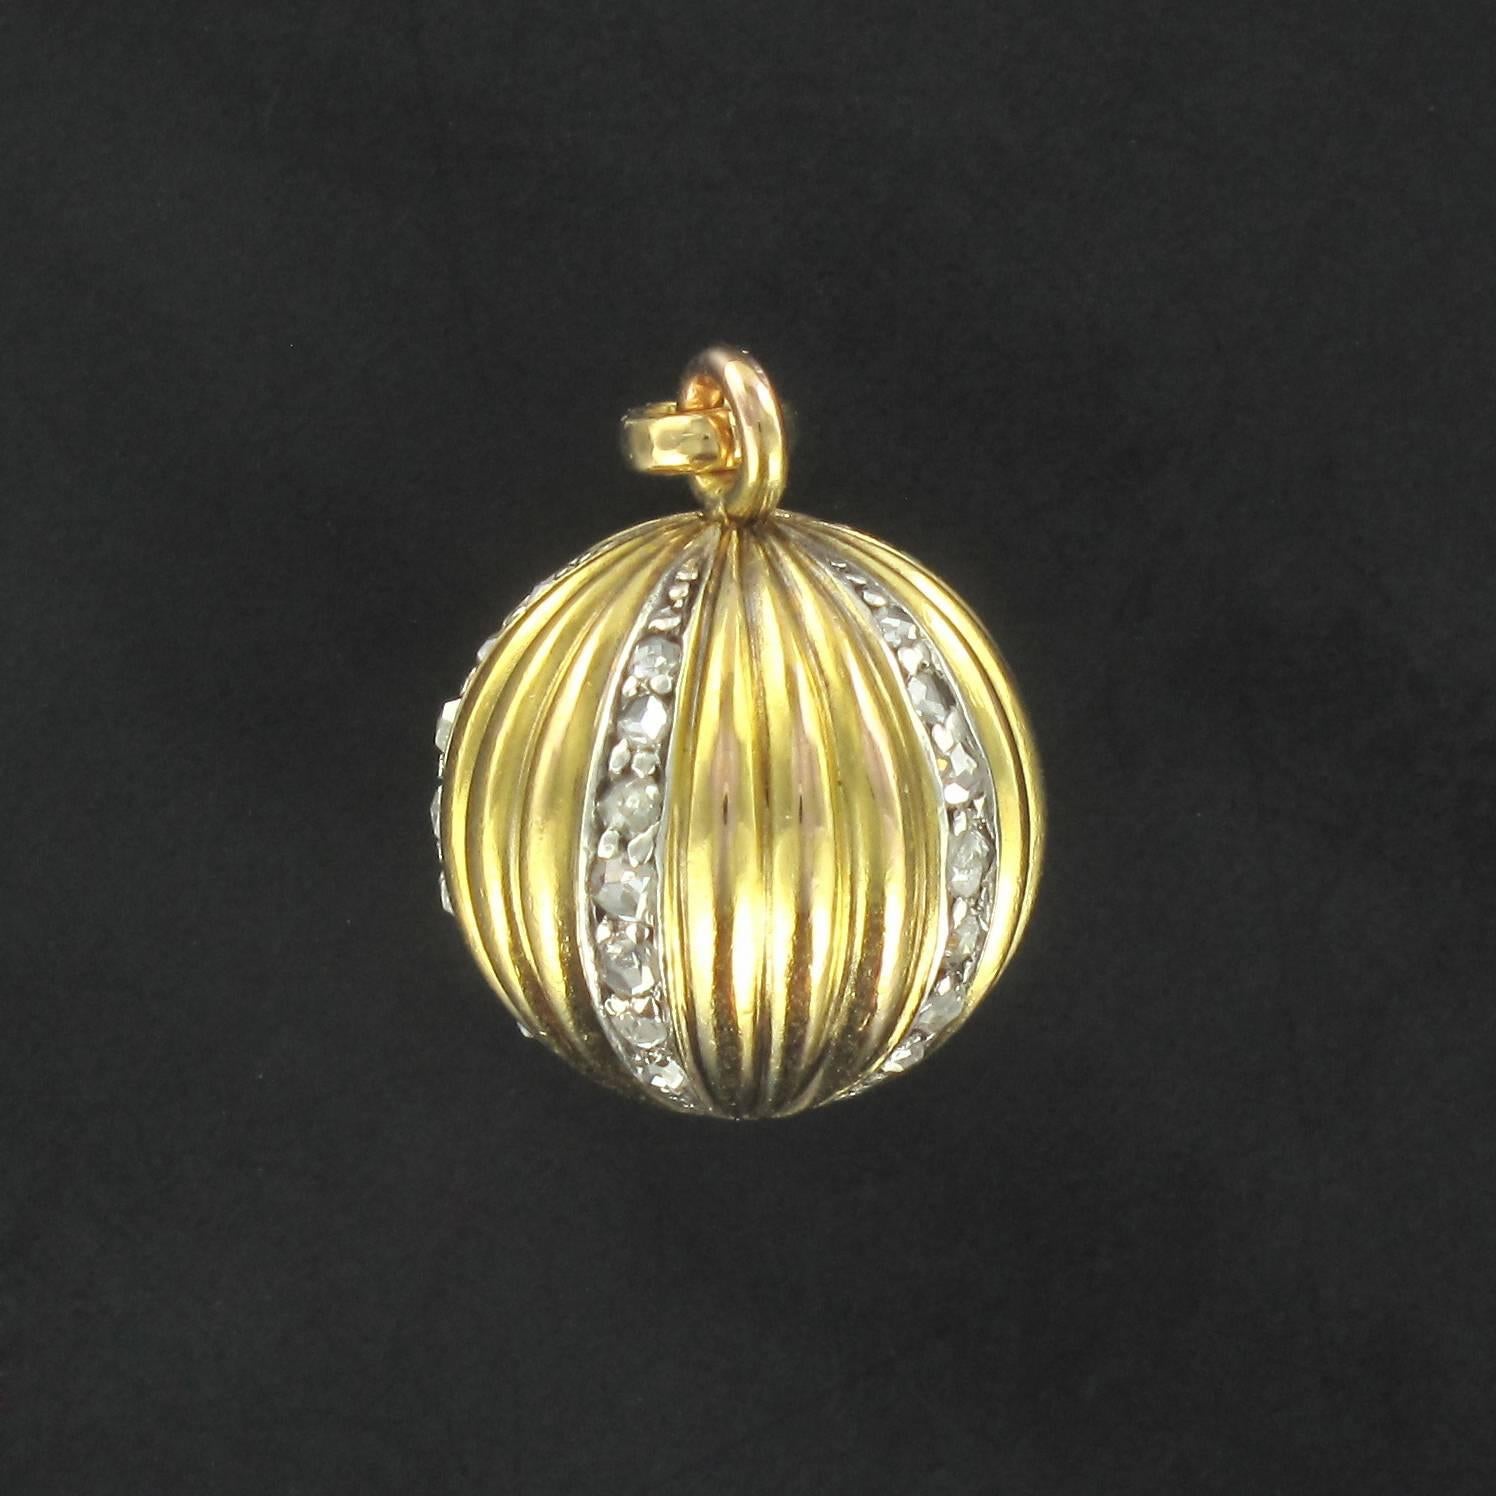 Pendant in 18 carat yellow gold. 

This antique pendant in the form of a ball features golden ridges separated by lines of rose cut diamonds. A larger rose cut diamond is bezel set in the base.  

Authentic antique pendant – French work of the